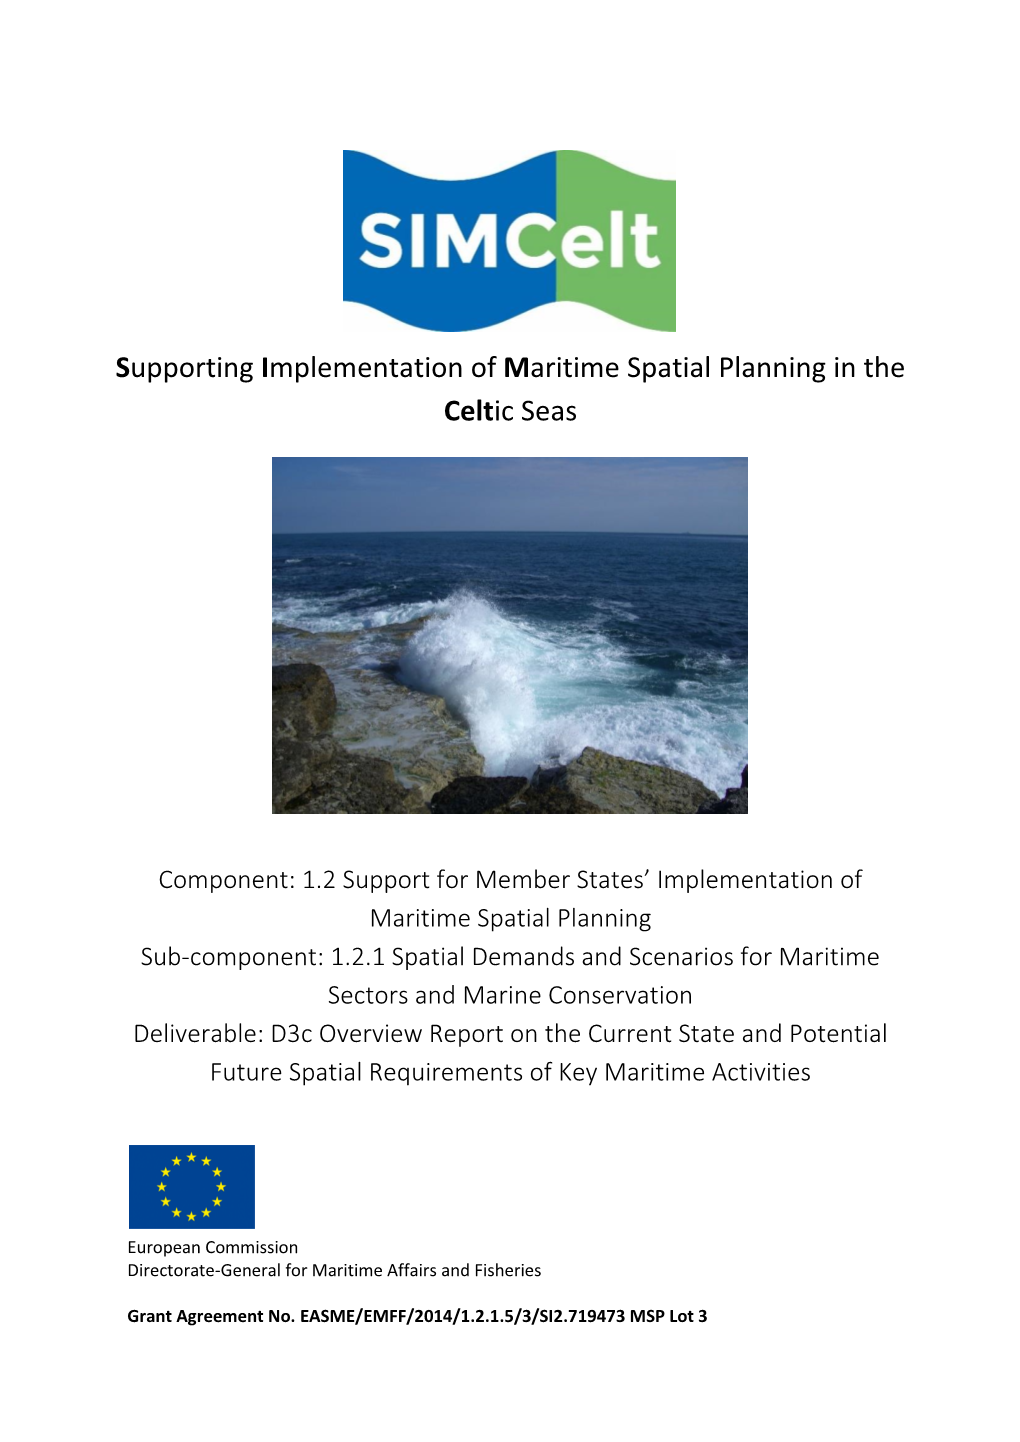 Supporting Implementation of Maritime Spatial Planning in the Celtic Seas (Simcelt)